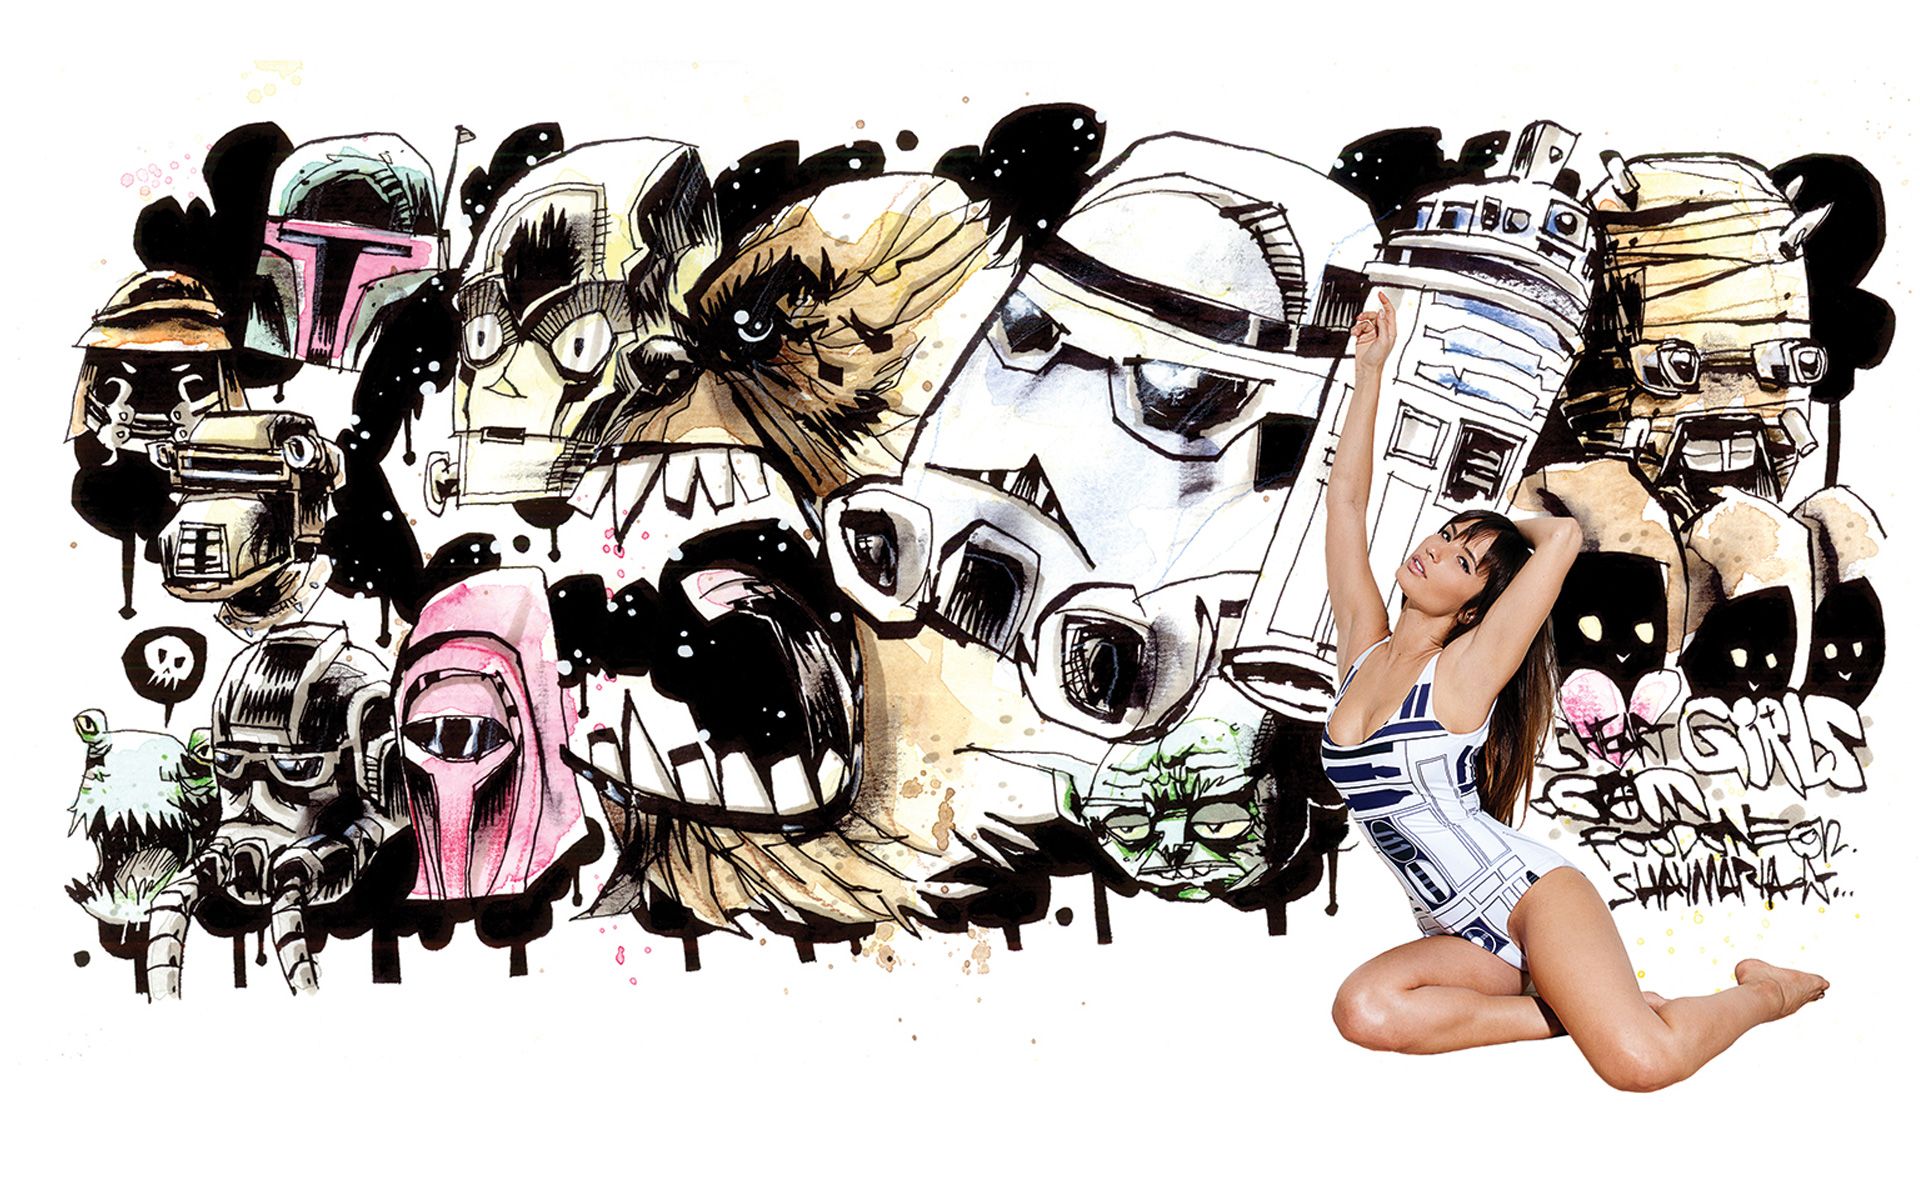 A digital artwork of a woman in a swimsuit sitting on the ground in front of a wall of Star Wars characters. - Graffiti